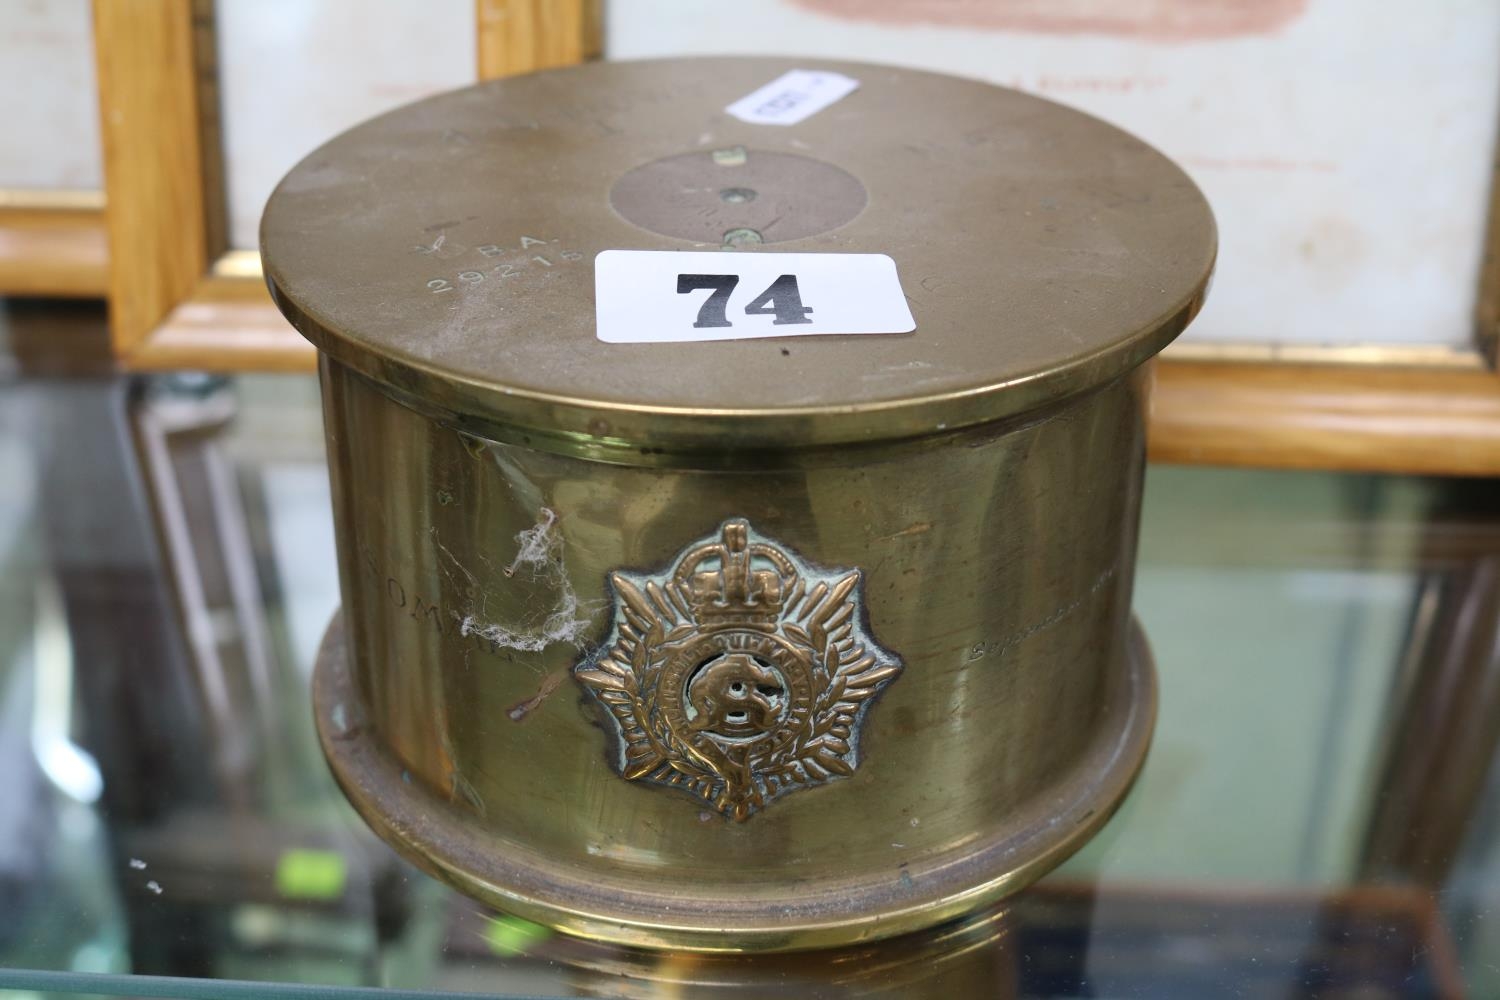 The Somme September 1916 4.5 Howitzer Brass Trench Art Shell tobacco jar with applied badge and